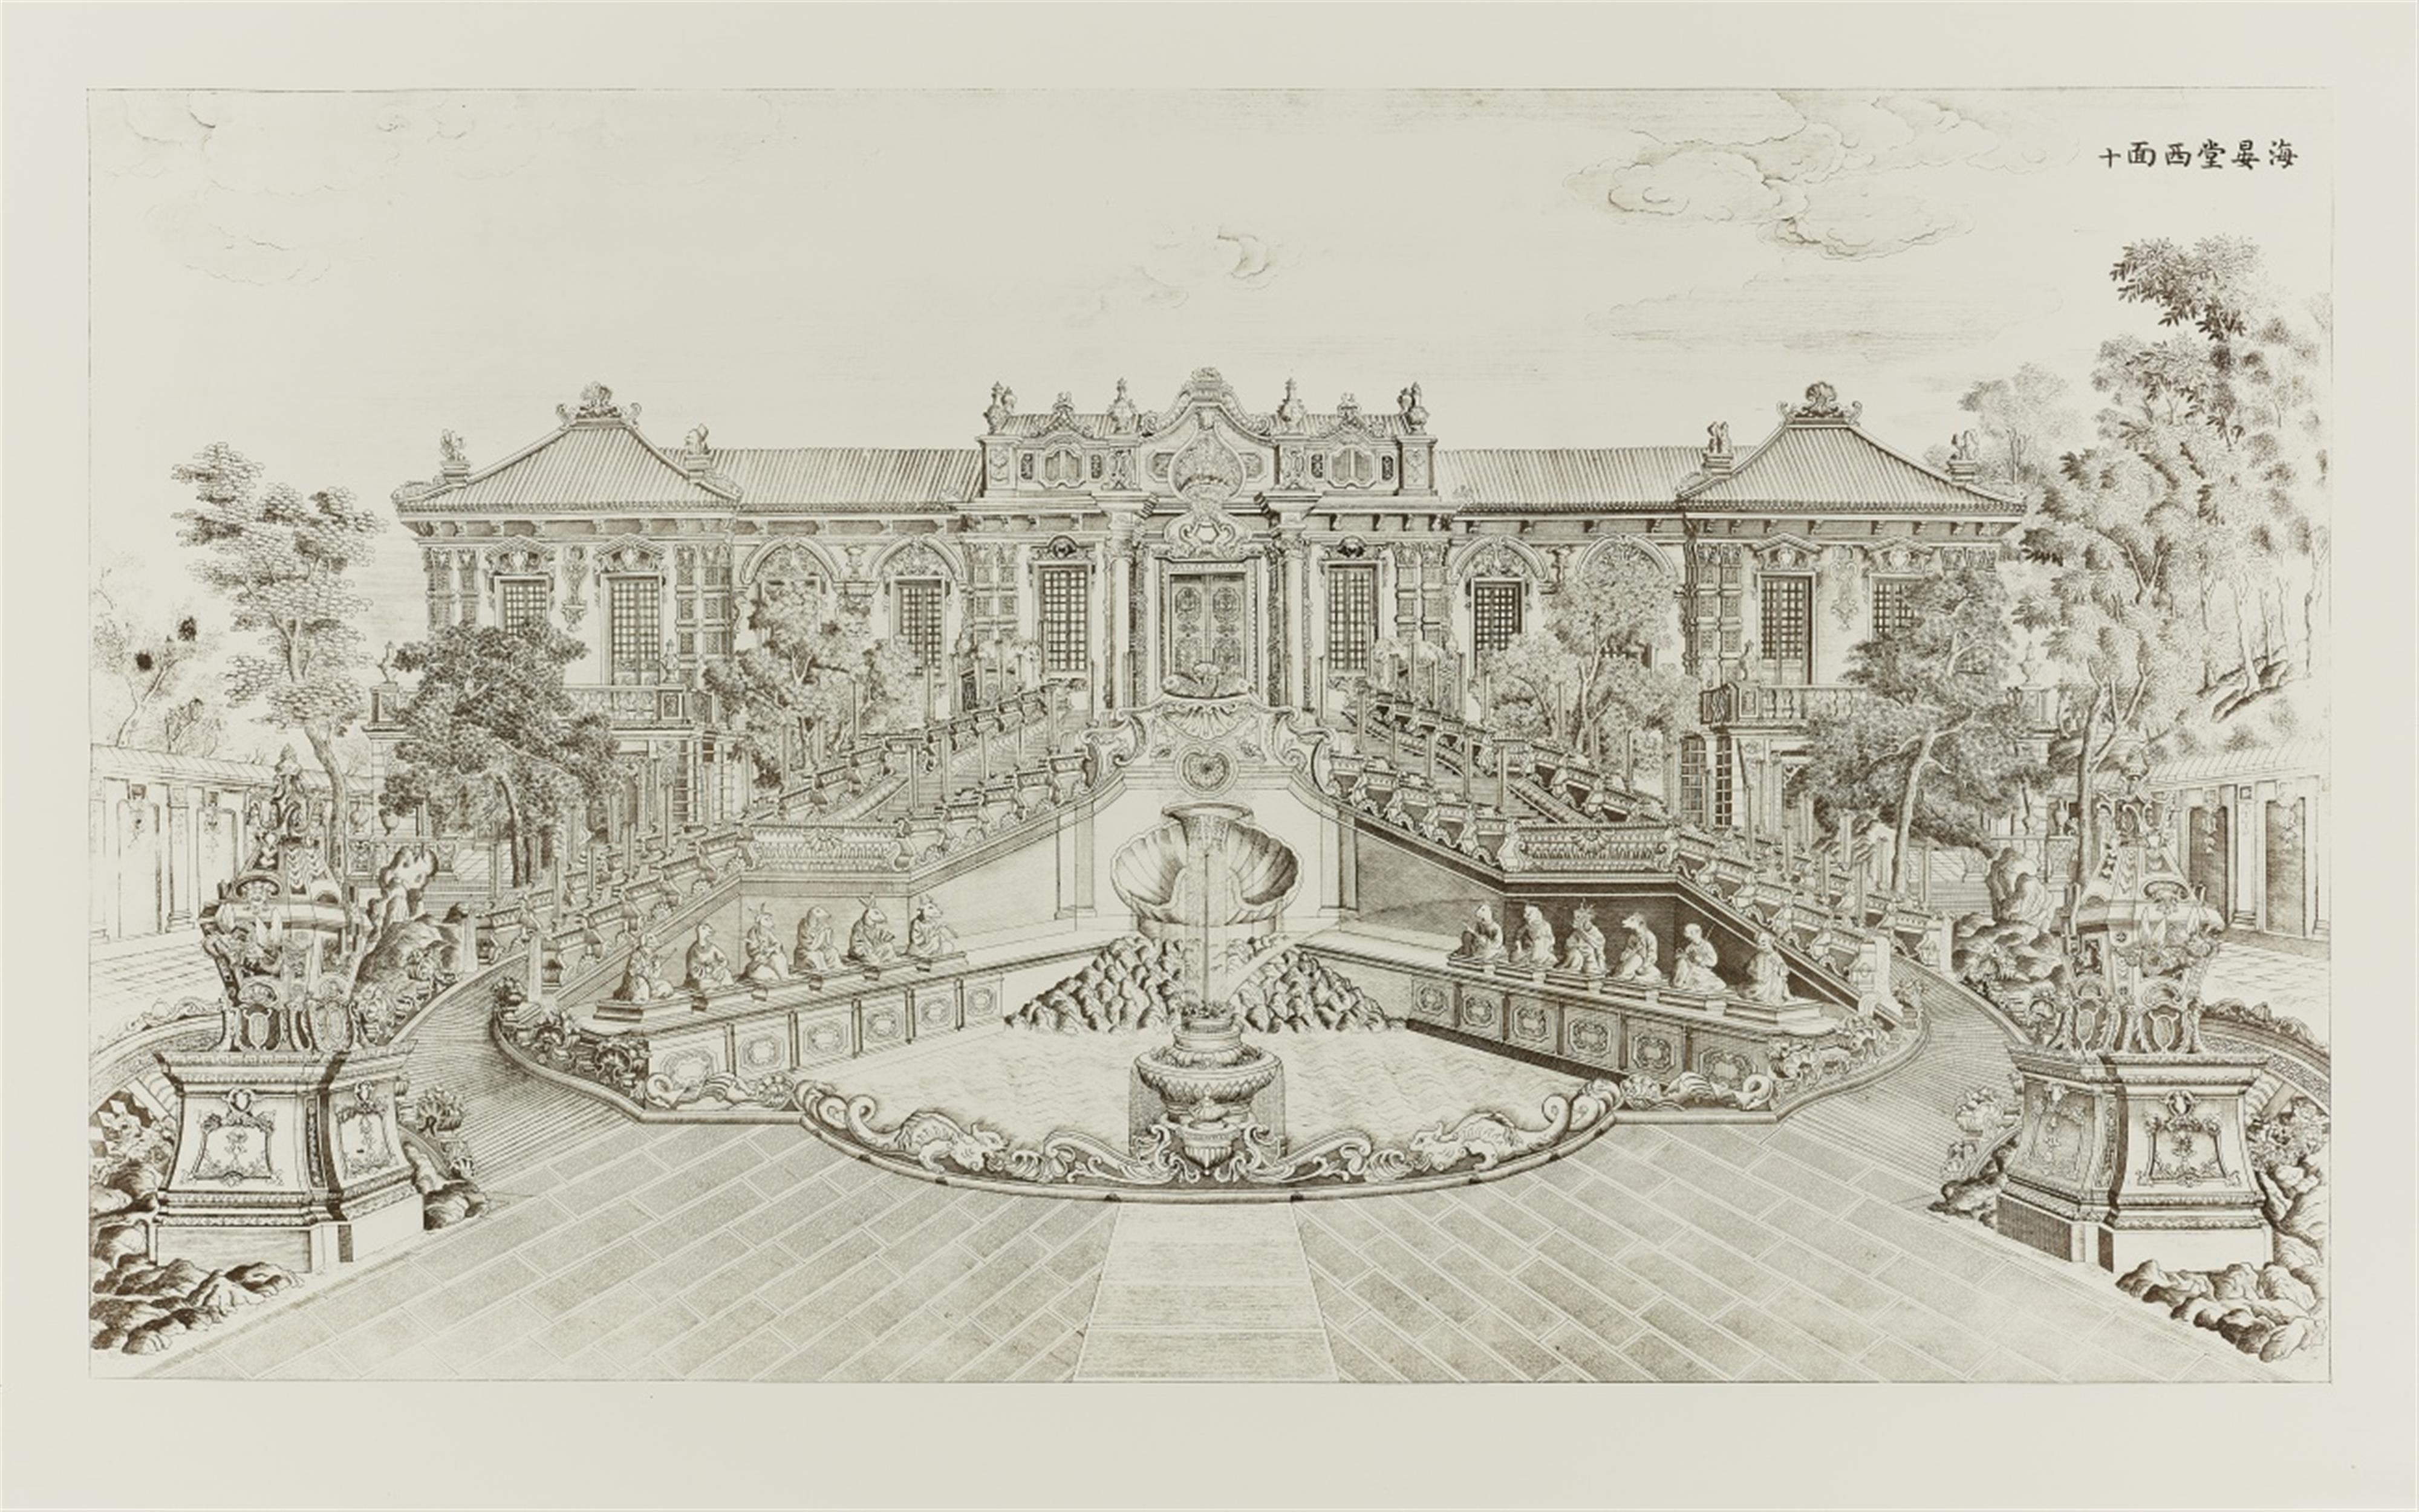 After Yi Lantai . 20th century - Sixteen etchings on wove paper depicting palaces, pavilions and gardens created by Giuseppe Castiglione in the Xiyang Lou (Western mansions) on the imperial grounds of the Old S... - image-8